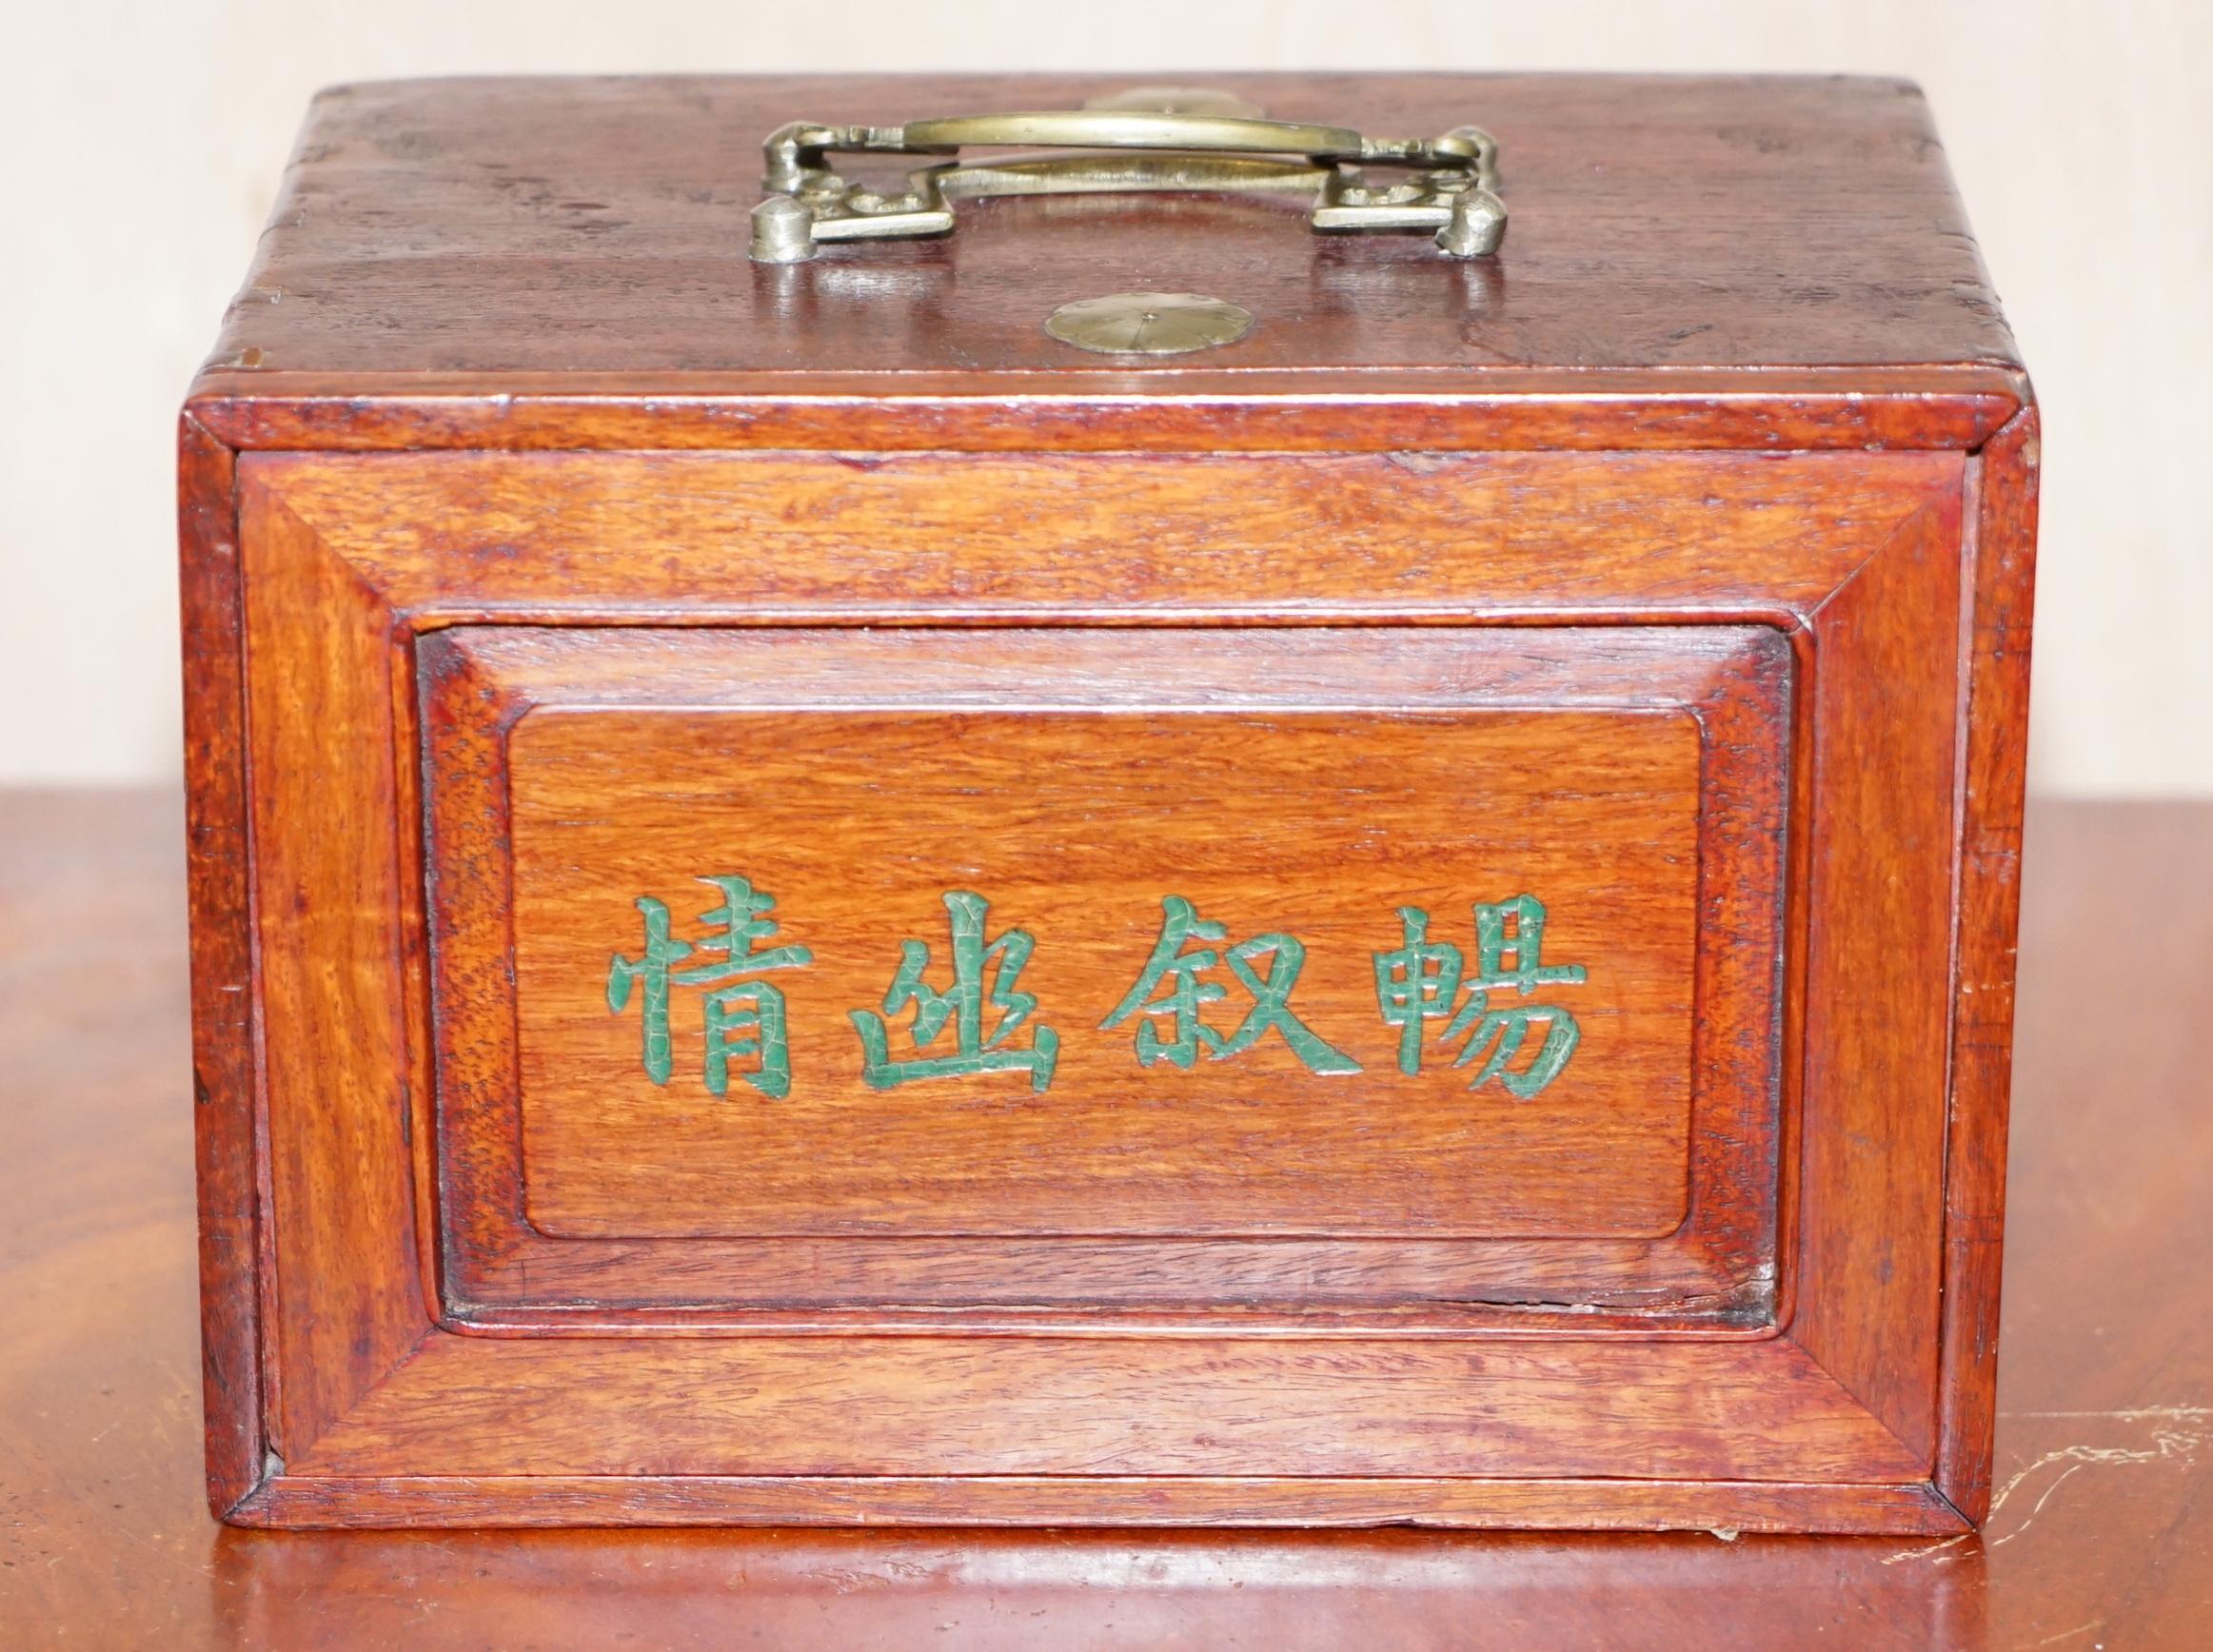 We are delighted to offer for sale this lovely original 19th century Chinese bovine and bamboo complete Mahjong set

A very good looking and well-made Victorian set, its complete with brass handled carry case, all the original tiles are in place